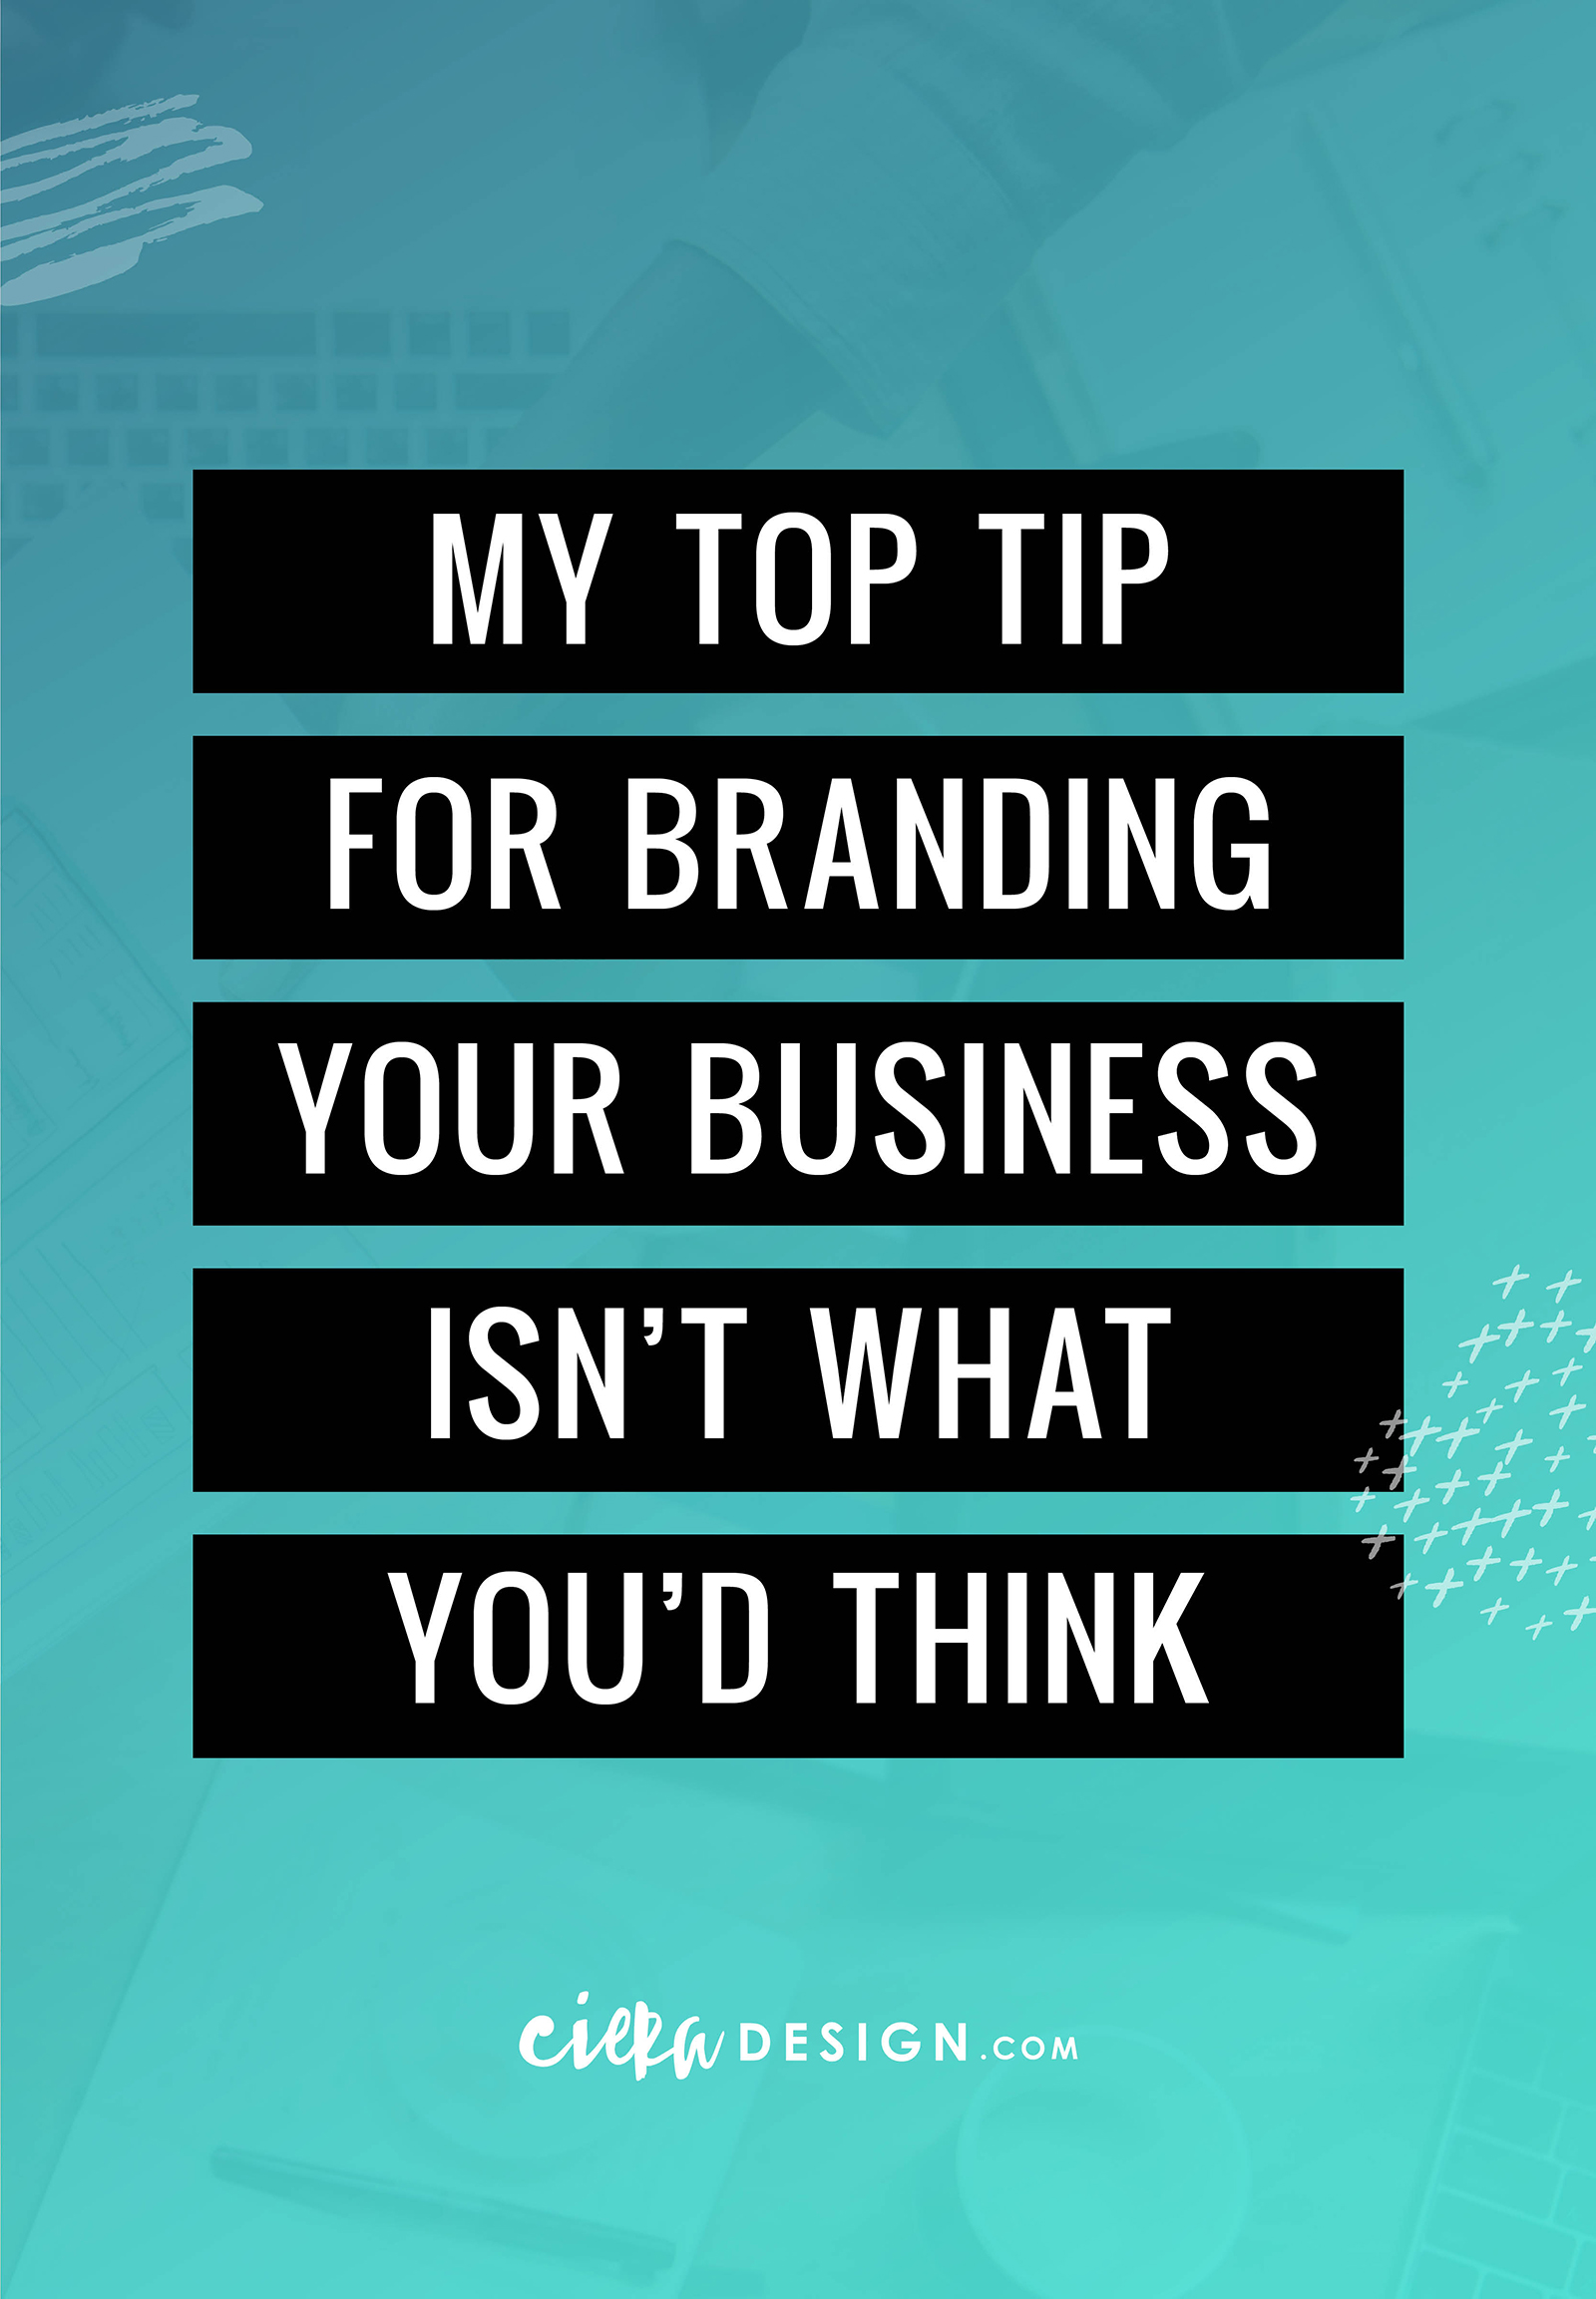 I was recently asked, "What is your best tip for branding a business?" And you may be surprised that my answer was not "hire a designer to create an amazing logo" or wasn't really design related at all...⠀